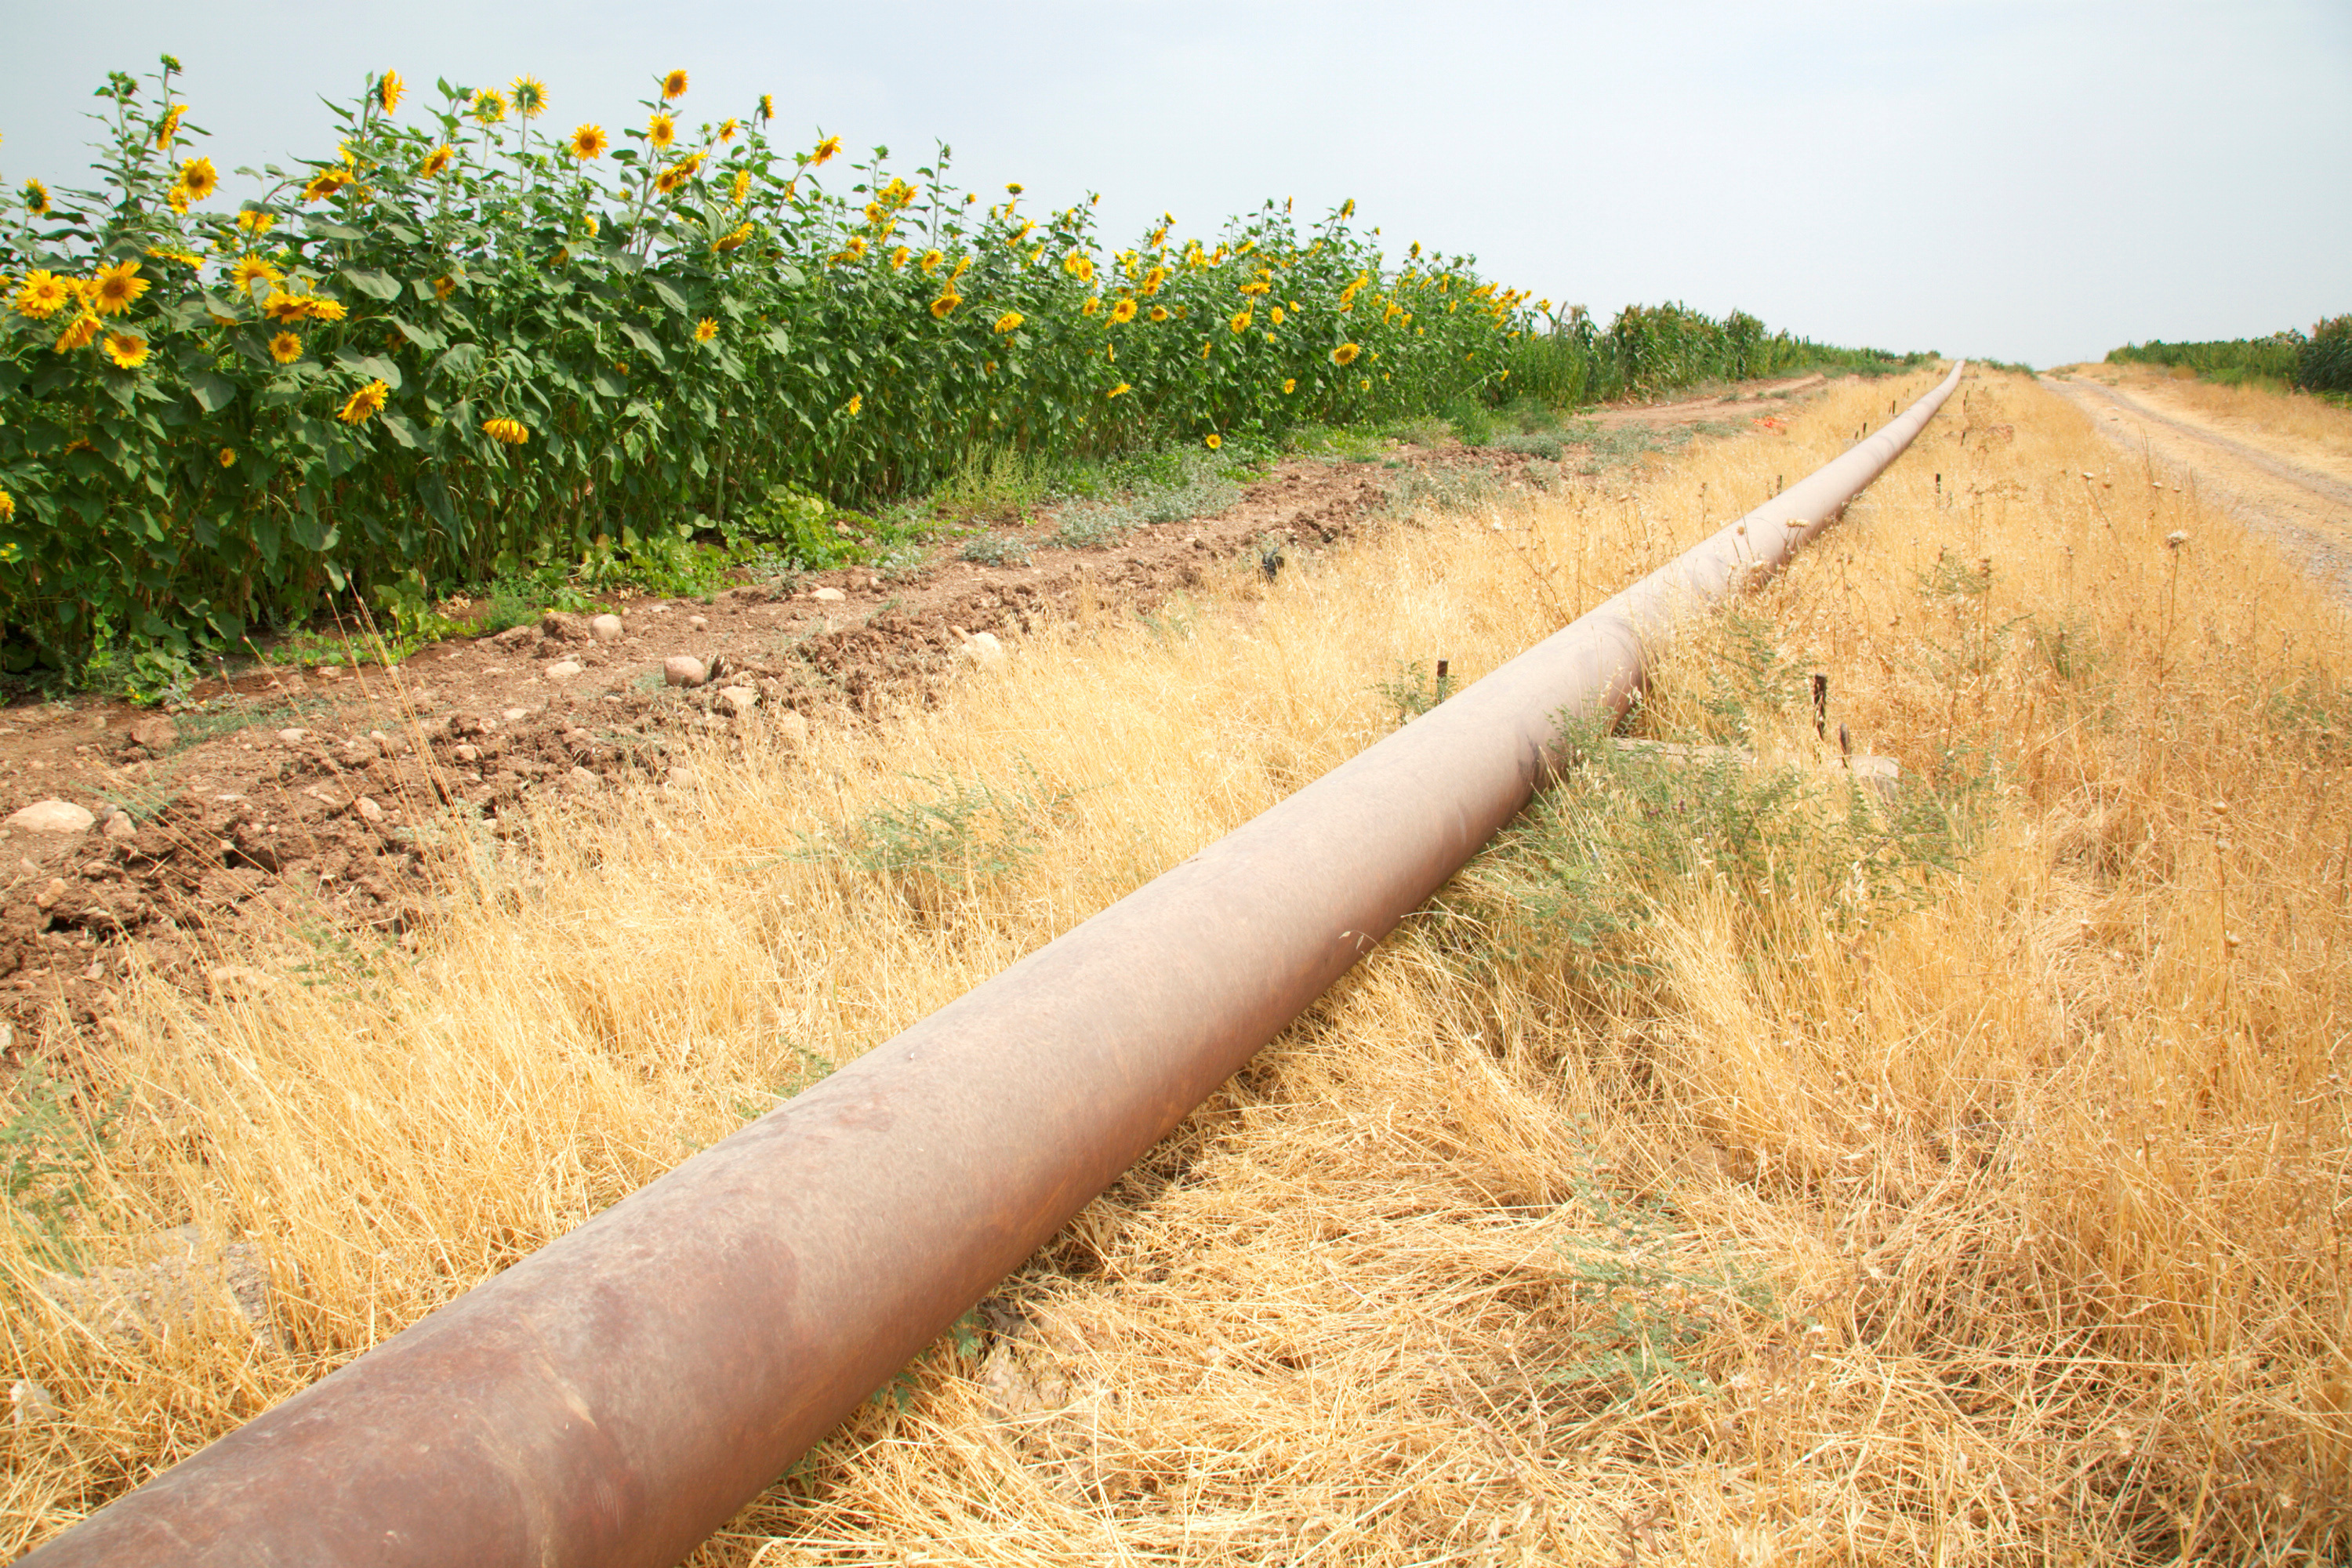 The Iraqi- Turkish pipeline is seen in Zakho district of the Dohuk Governorate of the Iraqi Kurdistan province